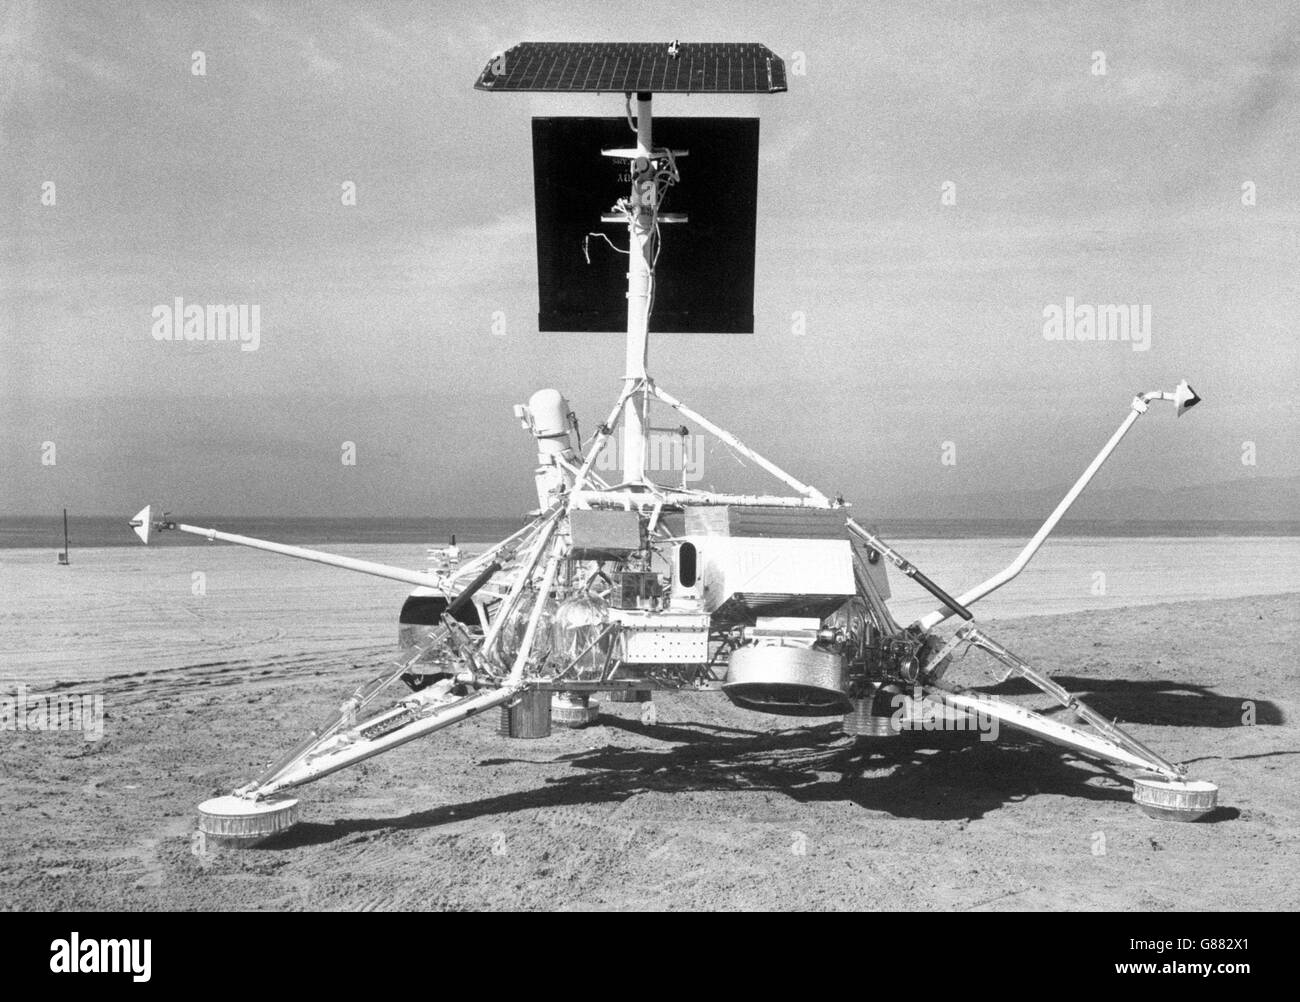 A Surveyor spacecraft, the exact counterpart of one scheduled to be launched on May 30th in America's 'soft landing' attempt on the Moon. It is pictured near Hughes Aircraft Company, Culver City, California, which designed and built the vehicles for NASA's Jet Propulsion Laboratory. Stock Photo